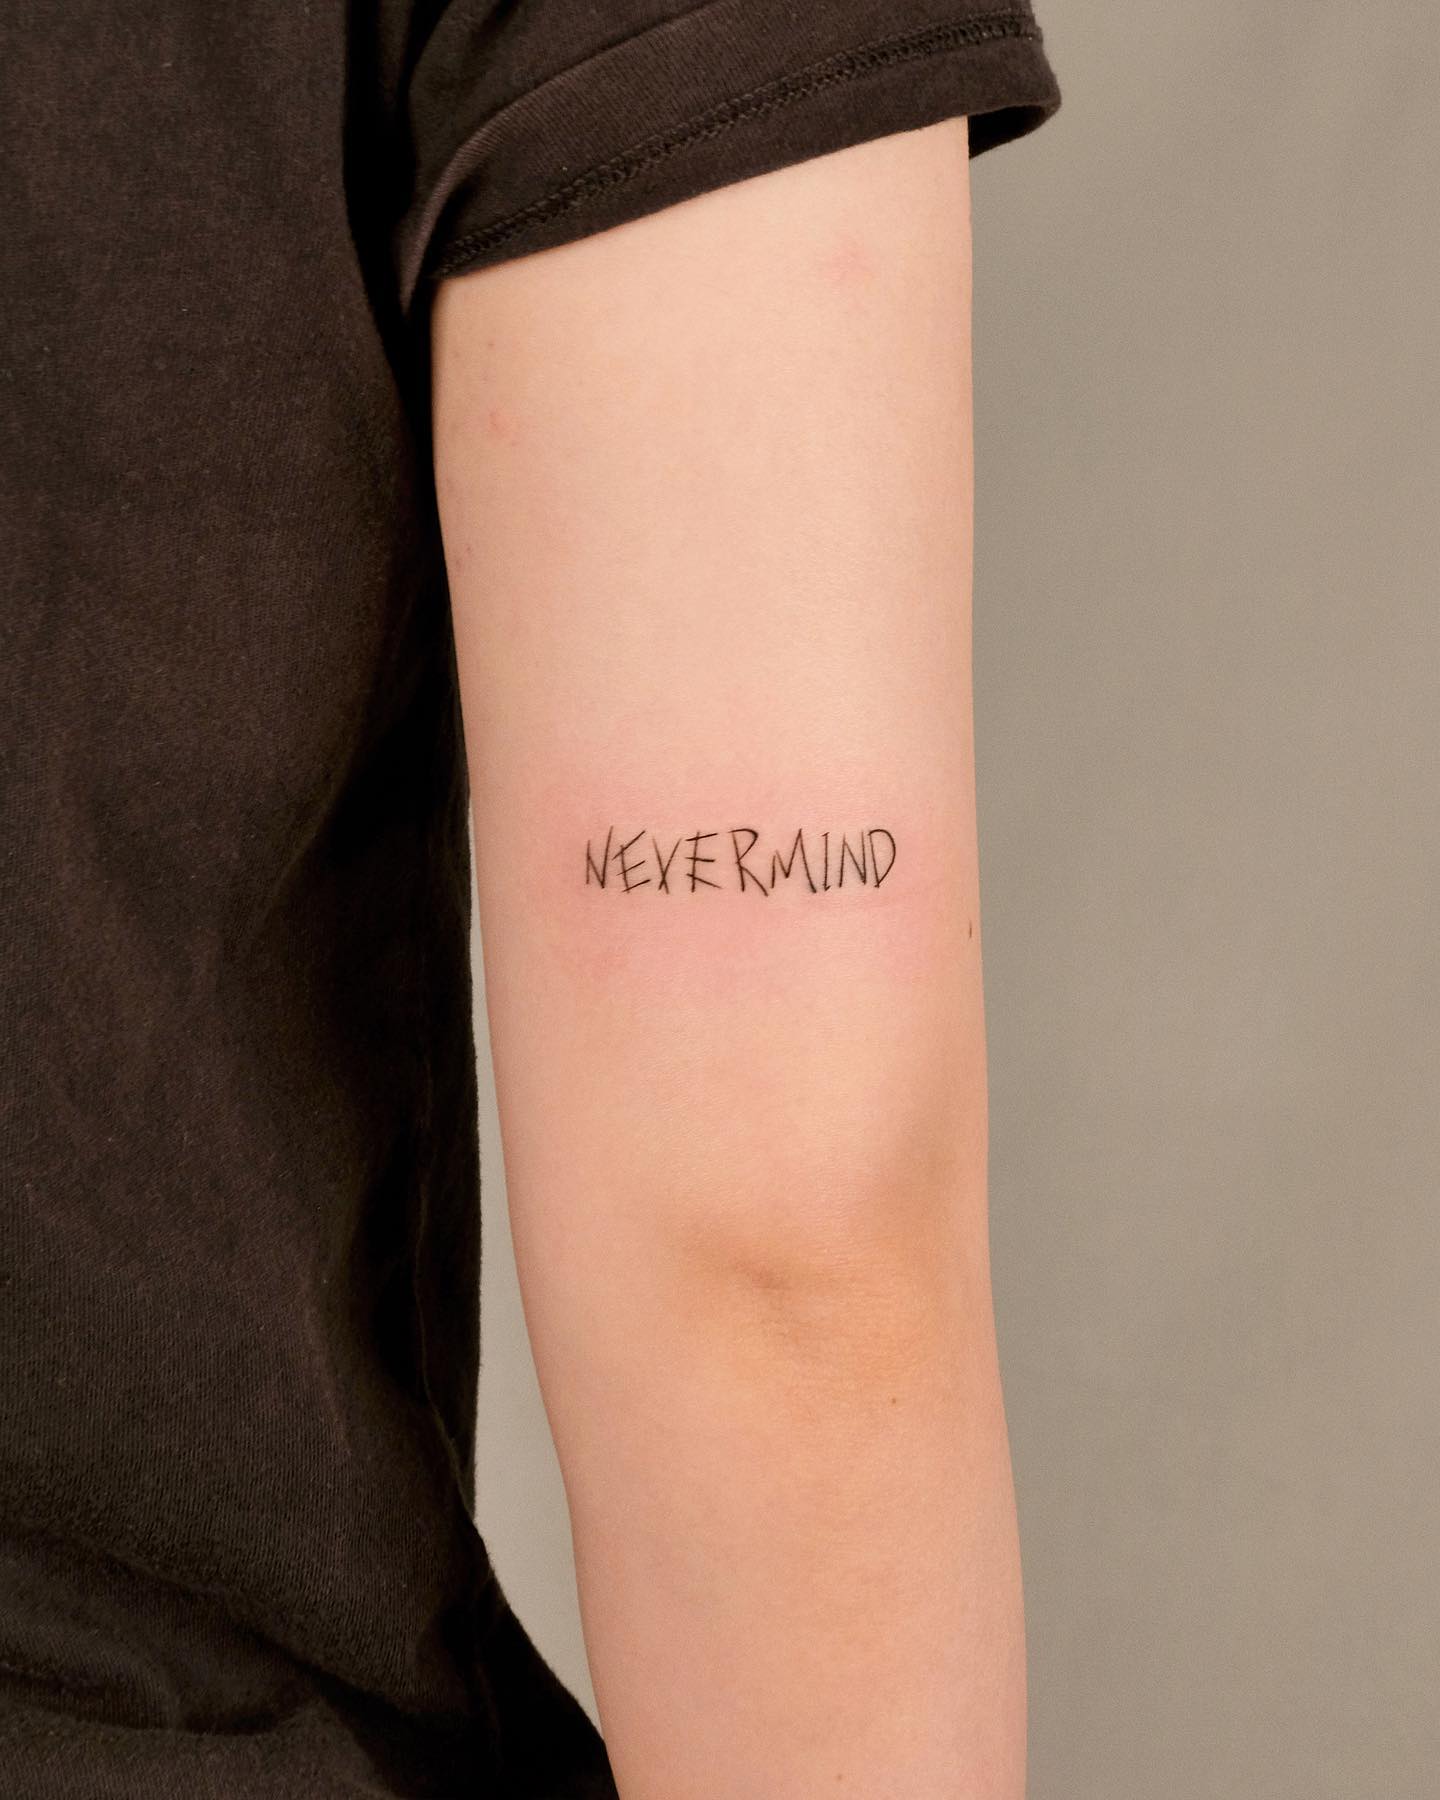 Never mind is such a straightforward word to go for. Place just something that suits and means a lot to you on your elbow. If you’re a casual and very laid-back person, this tattoo will look great on you. The best part about it? It is easy and quick to go for, almost painless!